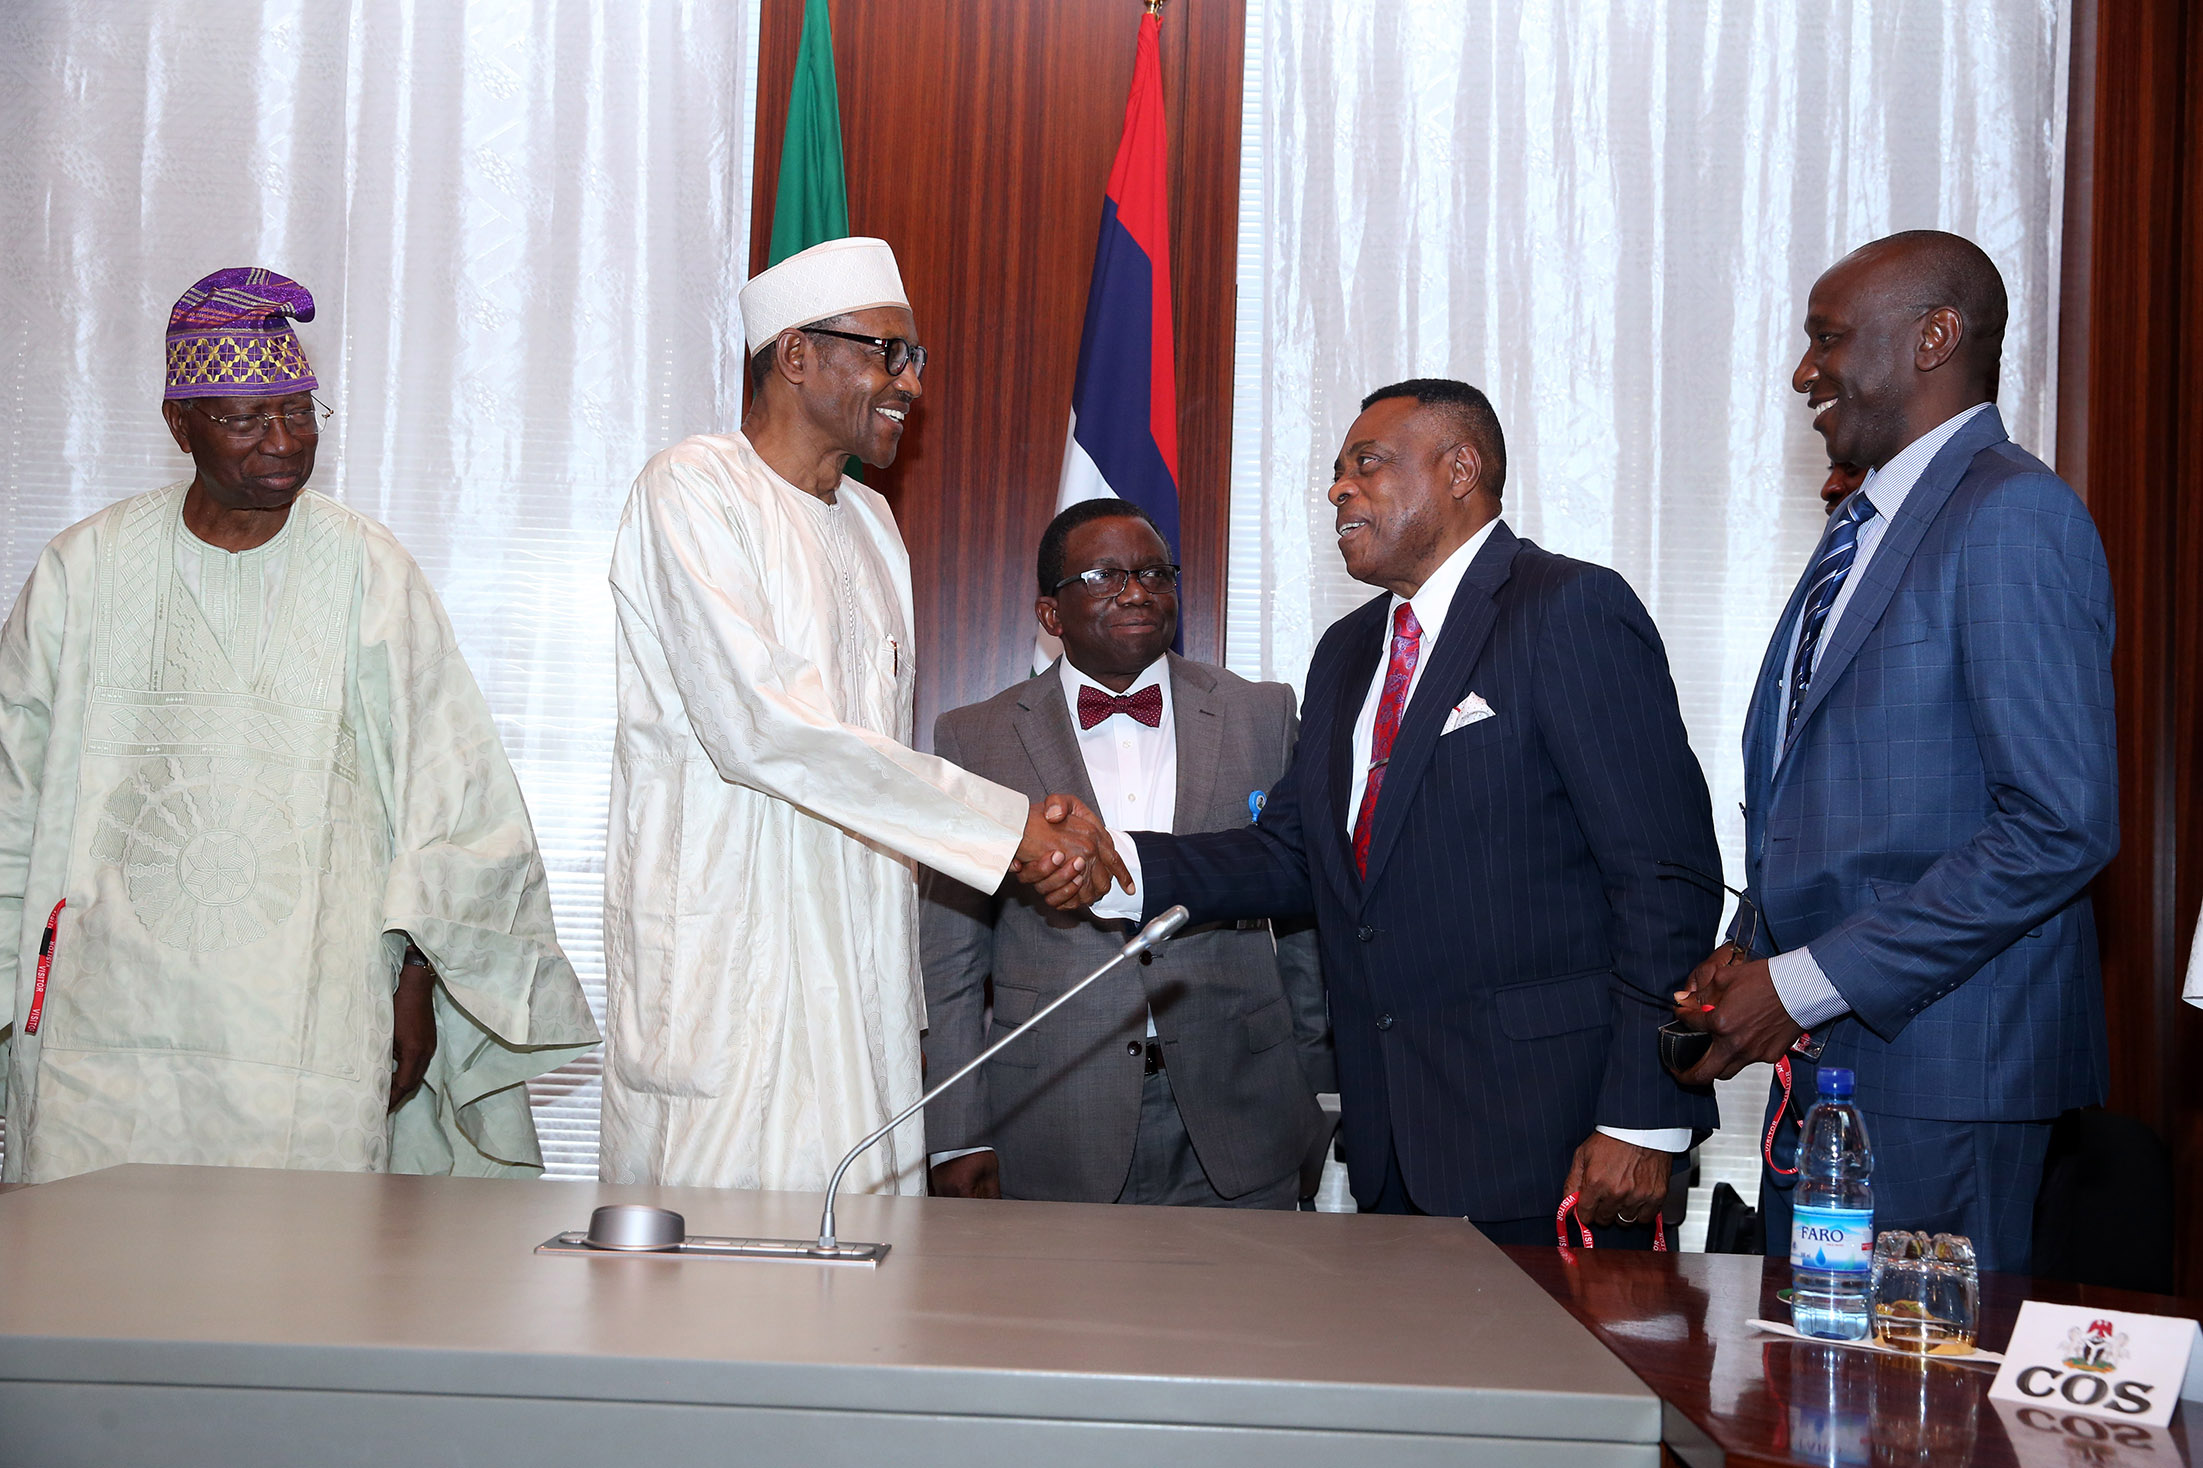 PRESIDENT BUHARI RECEIVED OBASANJO PRESIDENTIAL LIB TEAM. 5. L-R; Leader of the Team, Professor O. O. Akinkugbe, President Muhammadu Buhari, Minister of Health Prof Isaac Adewole, Prof Nimi Briggs and Prof Noel Wannang during a meeting with Team of Eminent Nigerians from Olusegun Obasanjo's President Library as they present health reports from health sector to the President at the State House in Abuja. PHOTO; SUNDAY AGHAEZE/STATE HOUSE PHOTO. MARCH 1 2016